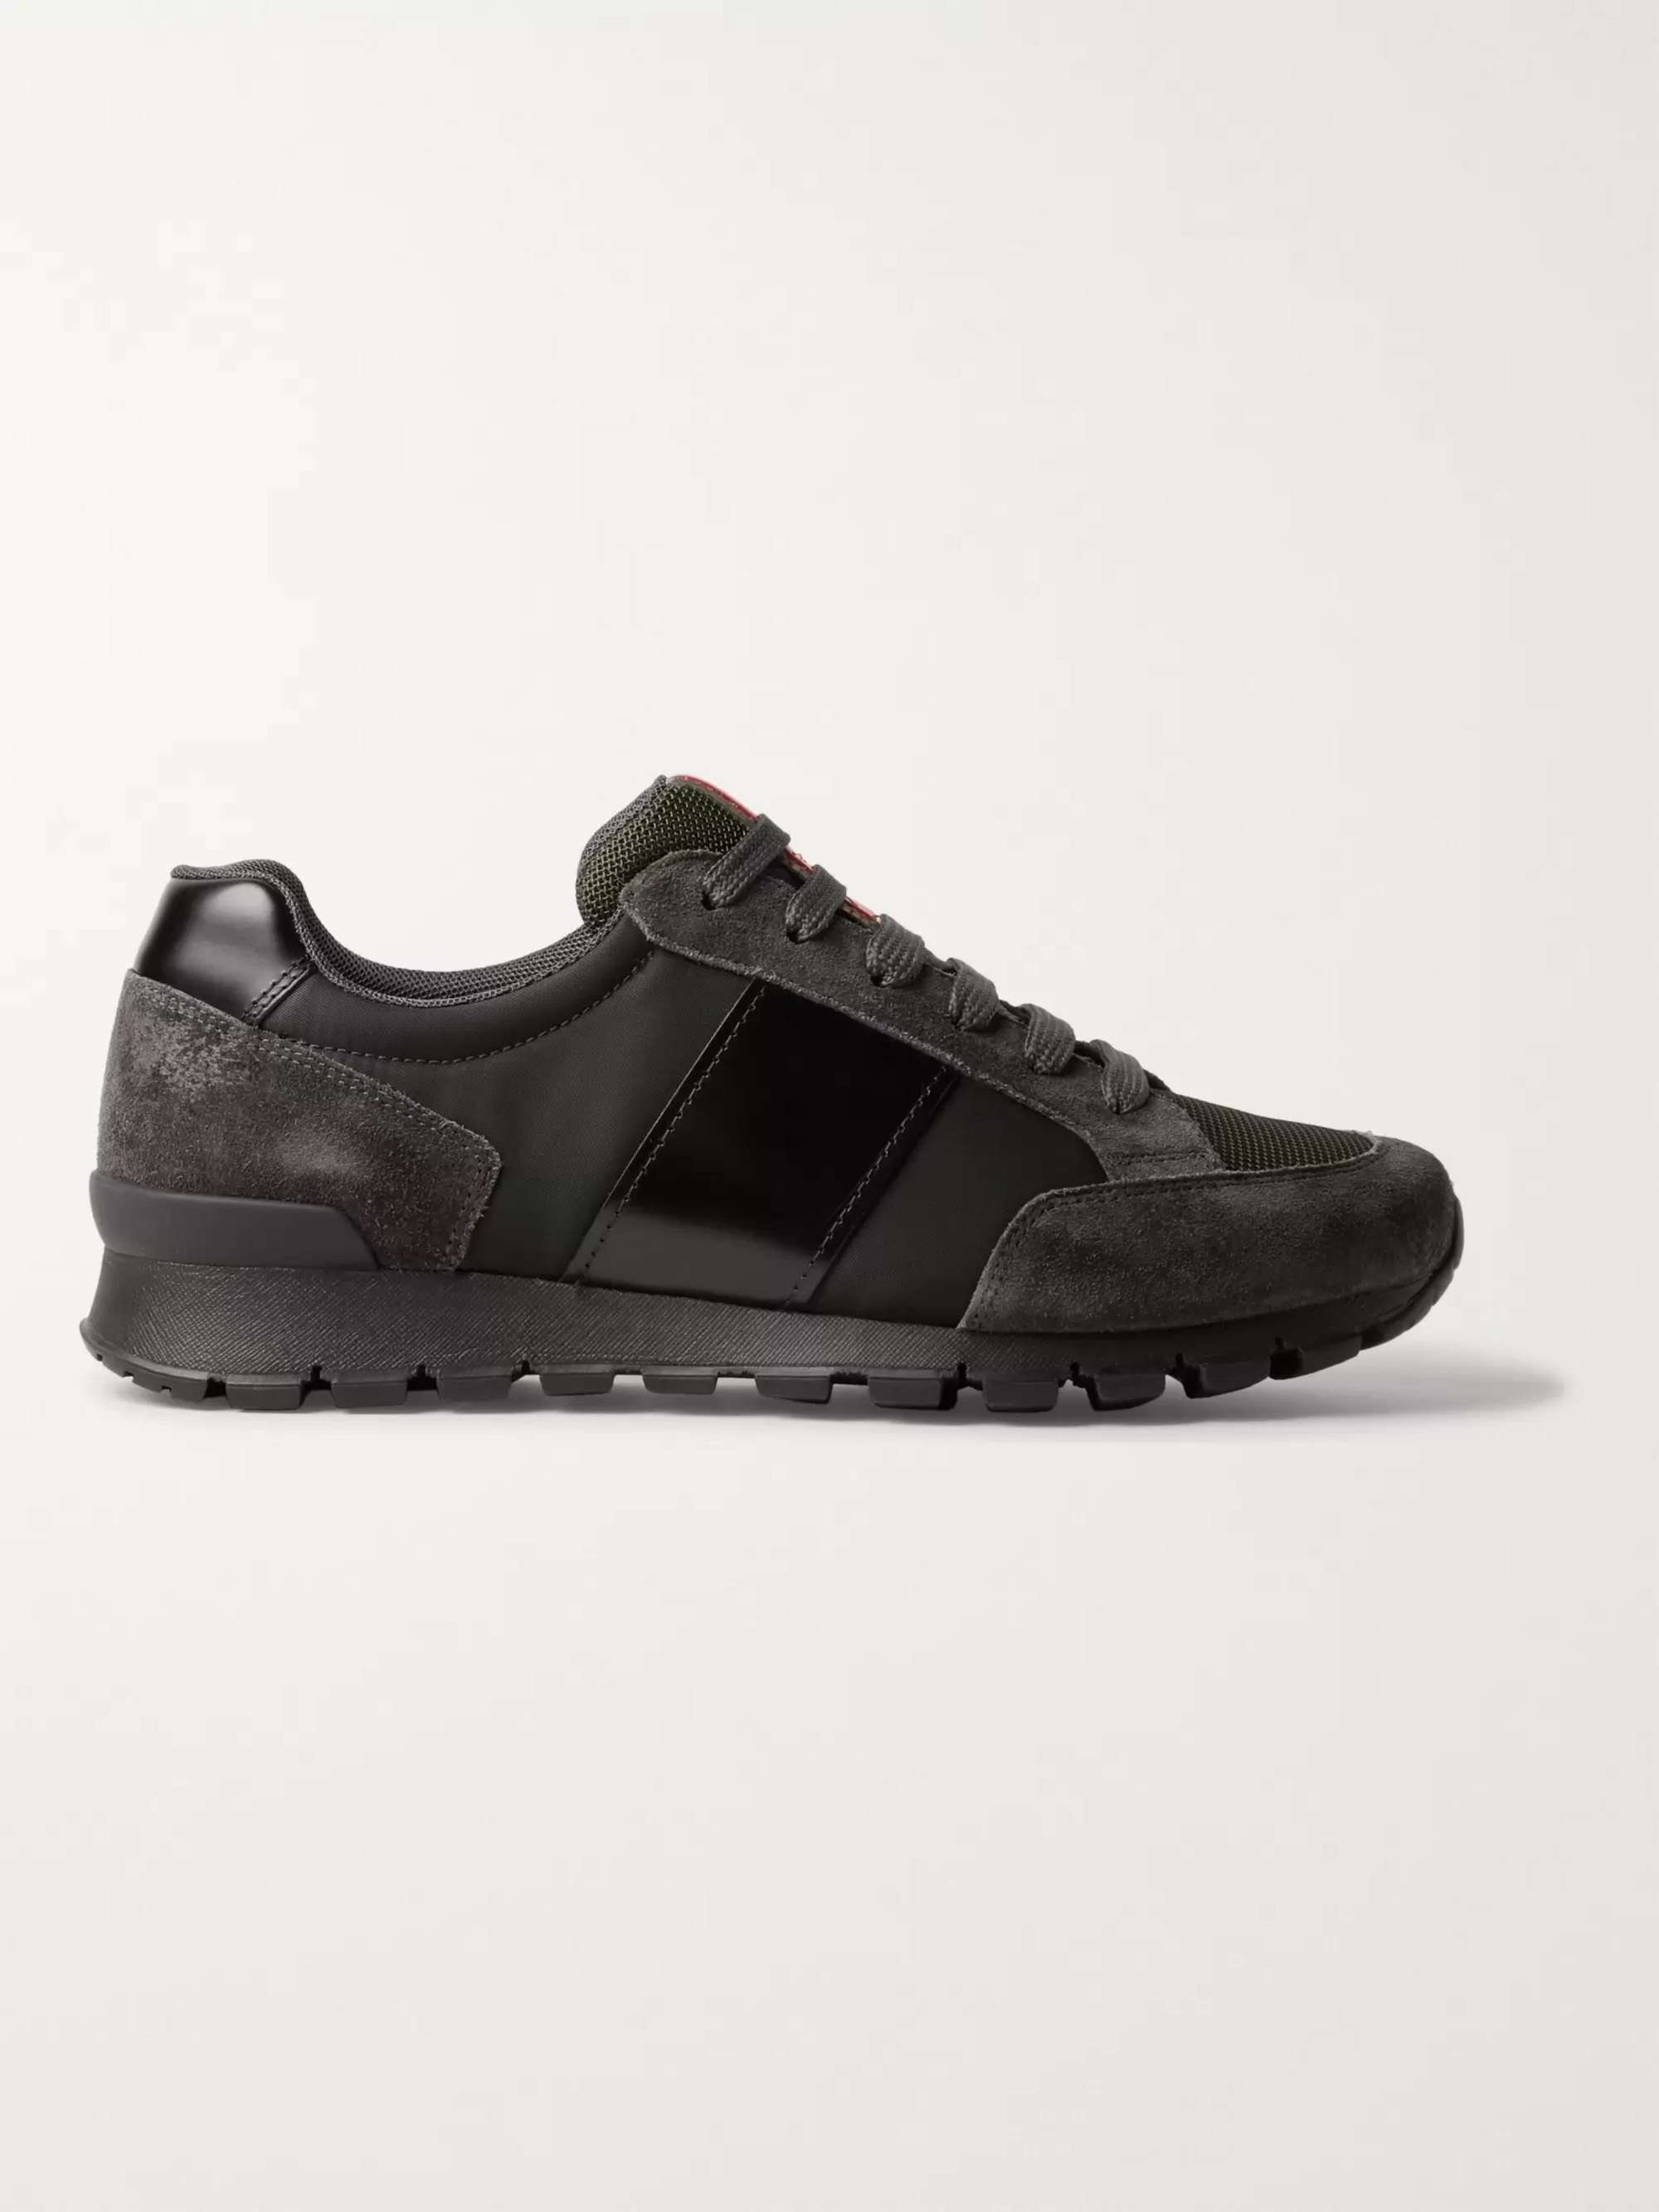 PRADA Match Race Panelled Leather, Suede, Nylon and Mesh Sneakers for Men |  MR PORTER